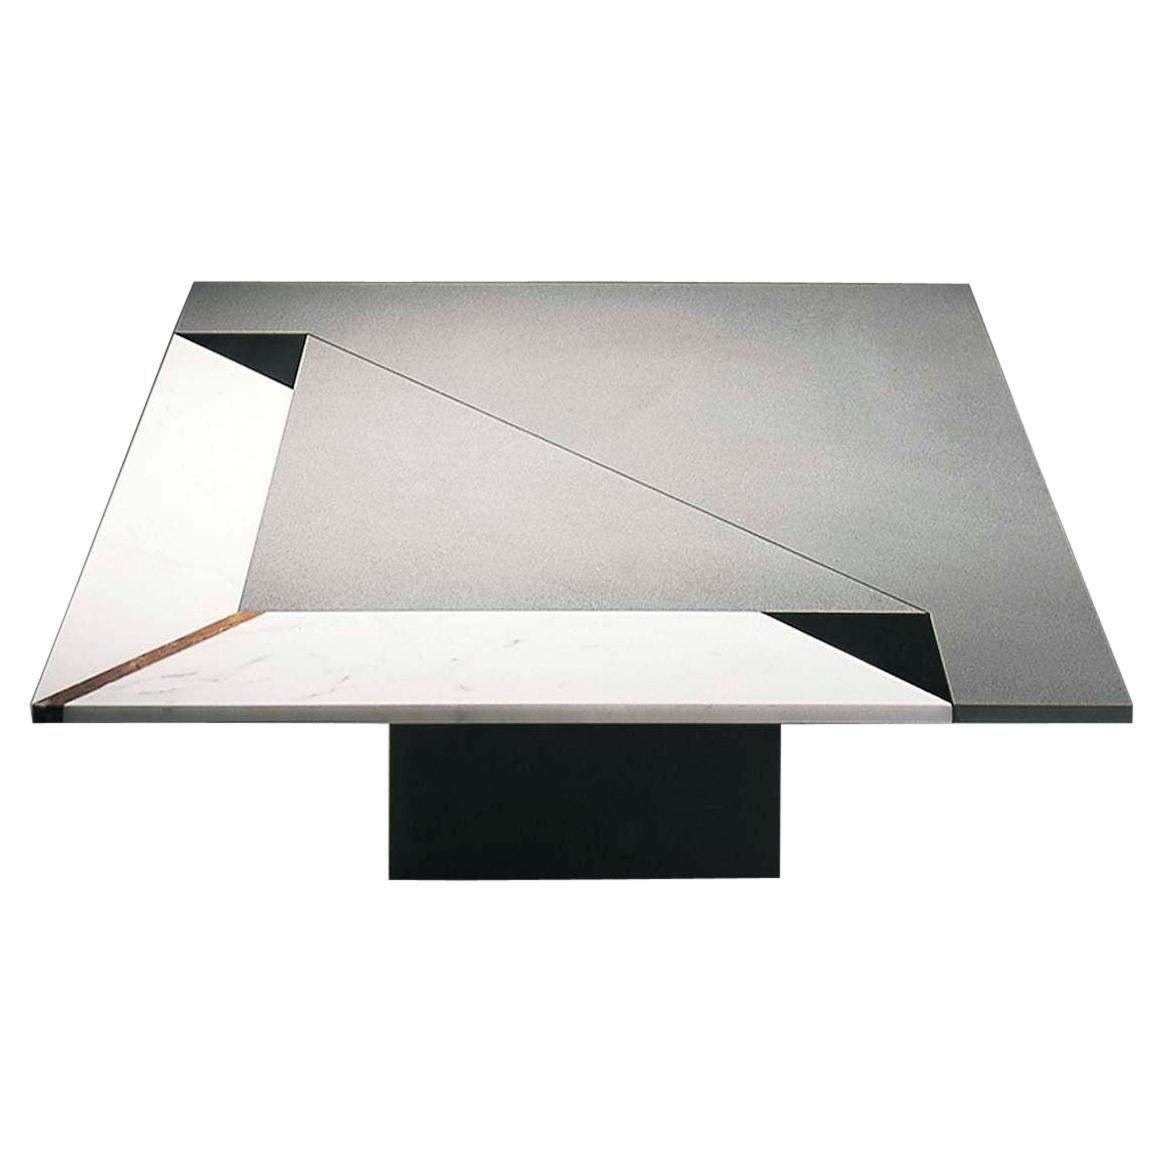 21st Century by Arch. R. Littel "INTARSIA FOLD" Square Marble Coffee Table For Sale